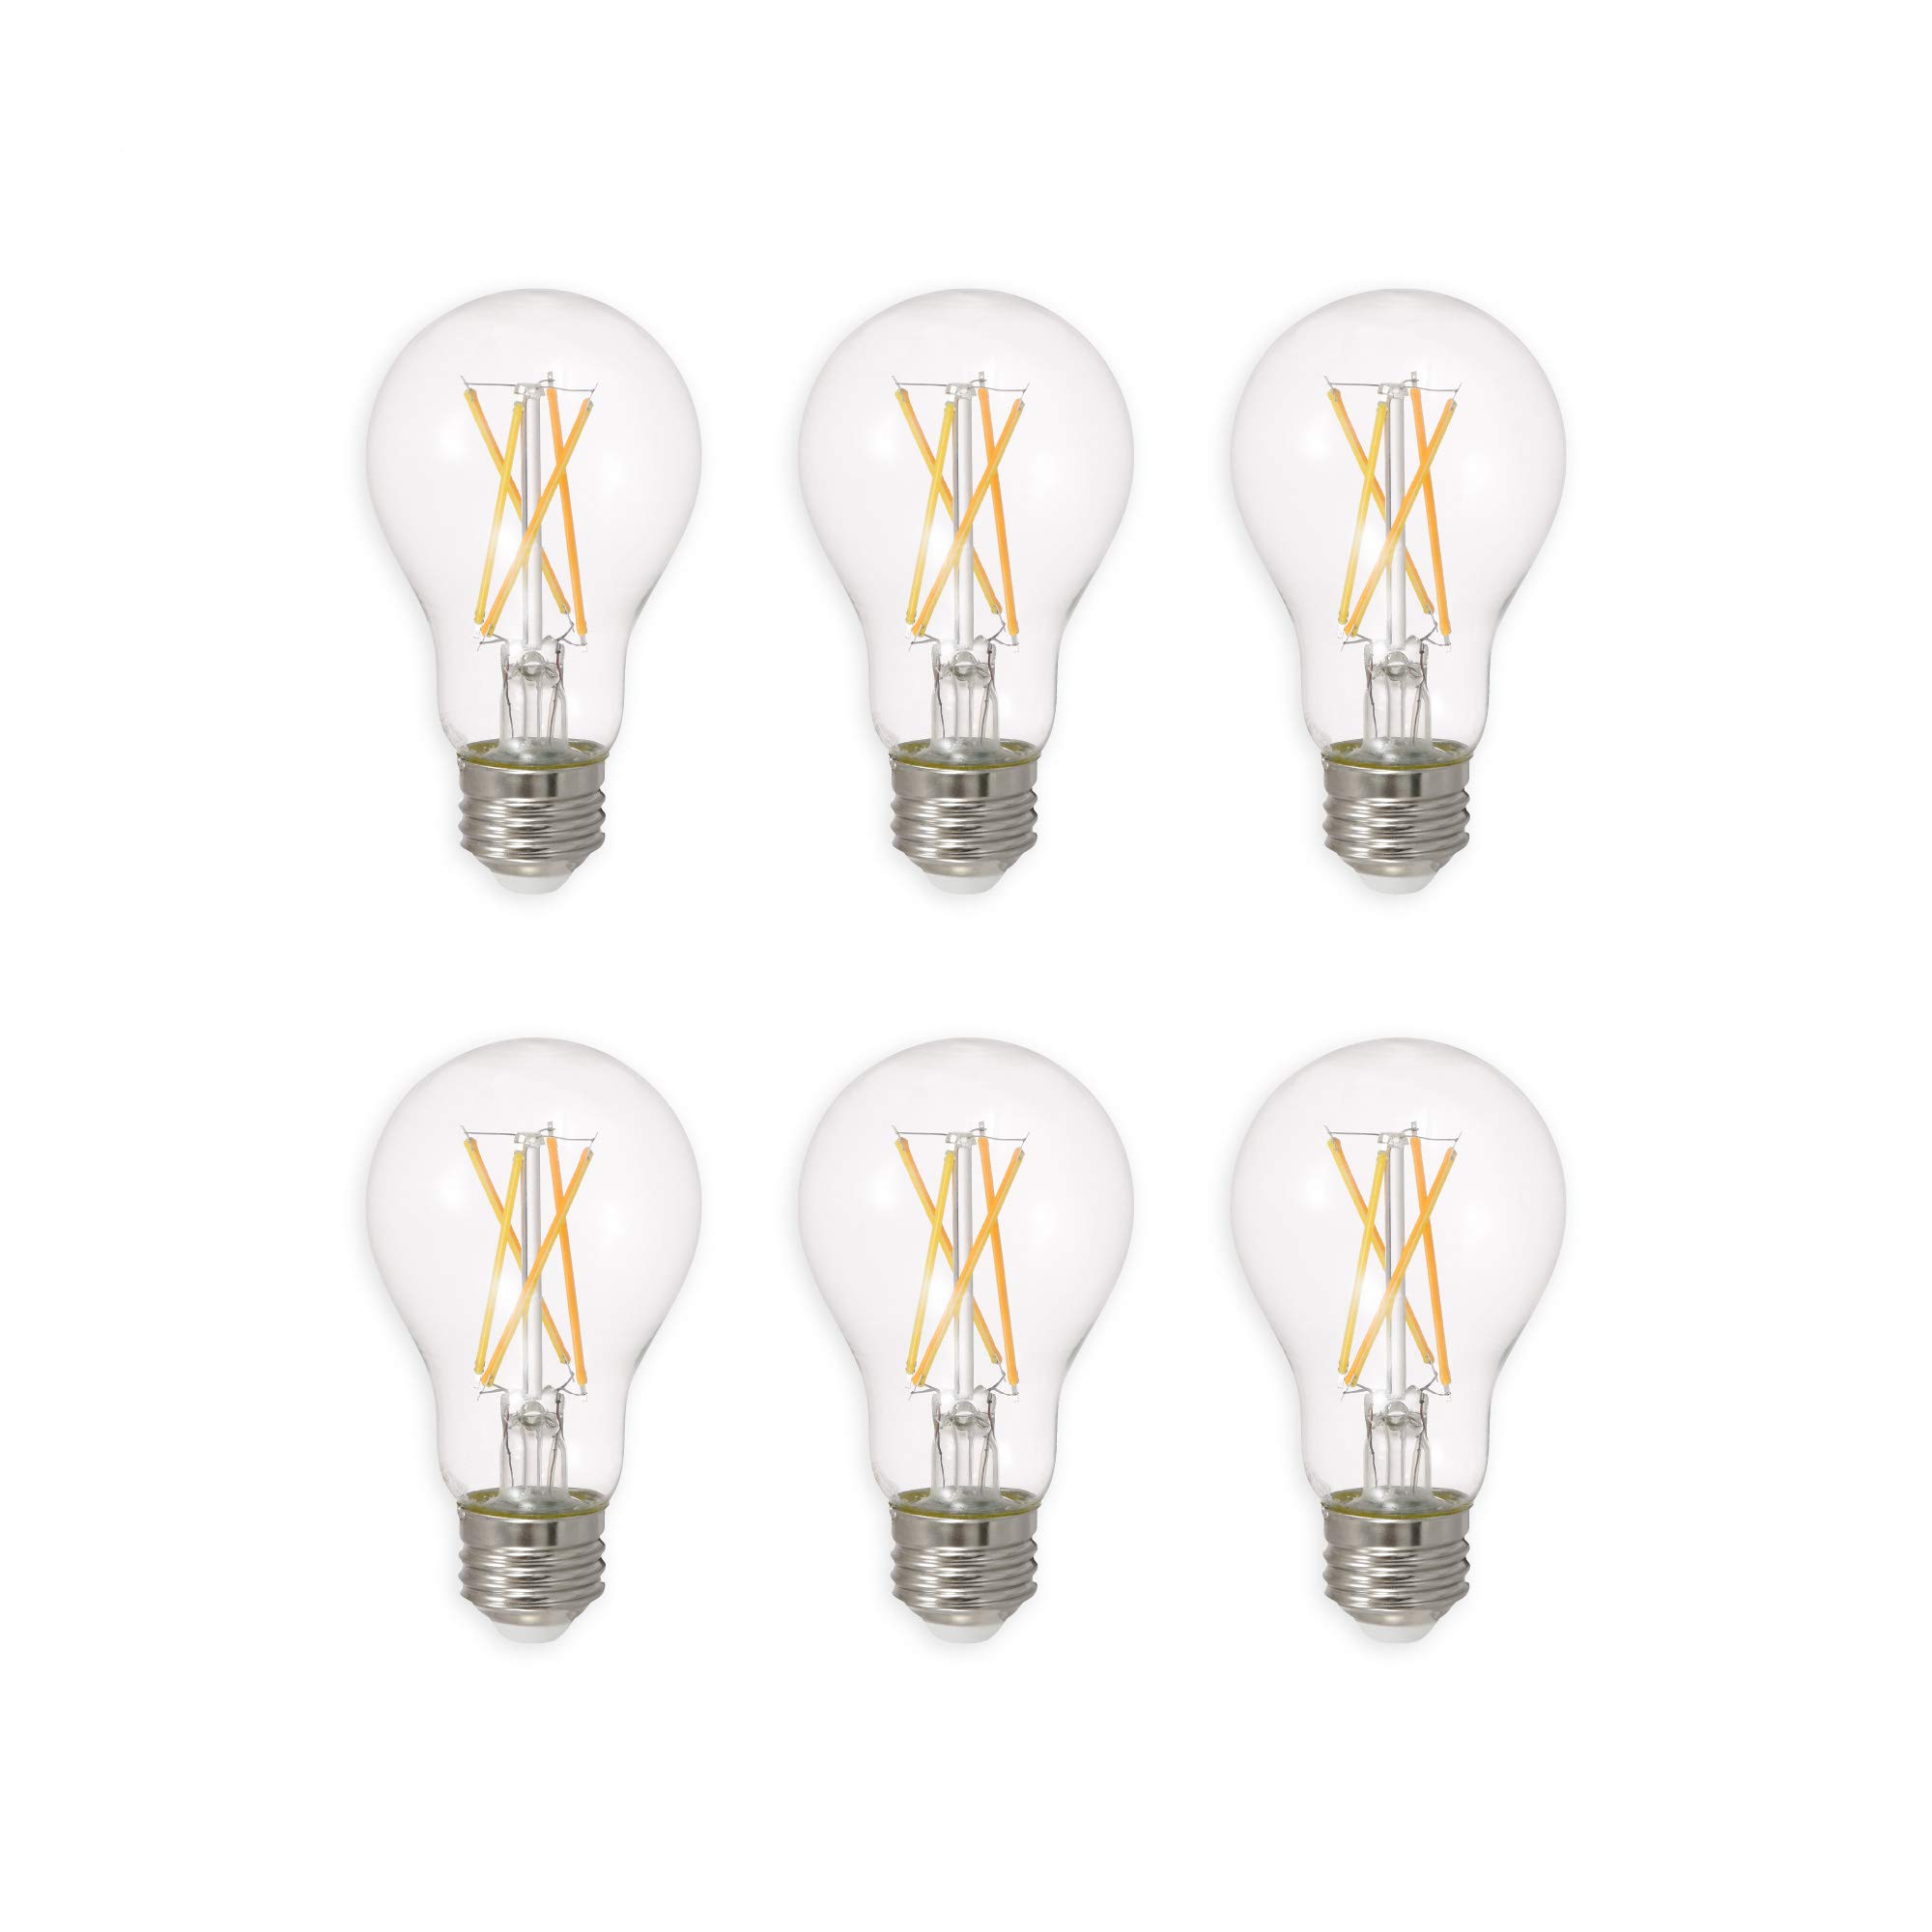 SYLVANIA LED TruWave Natural Series Light Bulb, 60W Equivalent, Efficient 8W A19, Medium Base, Dimmable, 800 Lumens, 2700K, Soft White, Clear - 6 Count (Pack of 1) (40806)